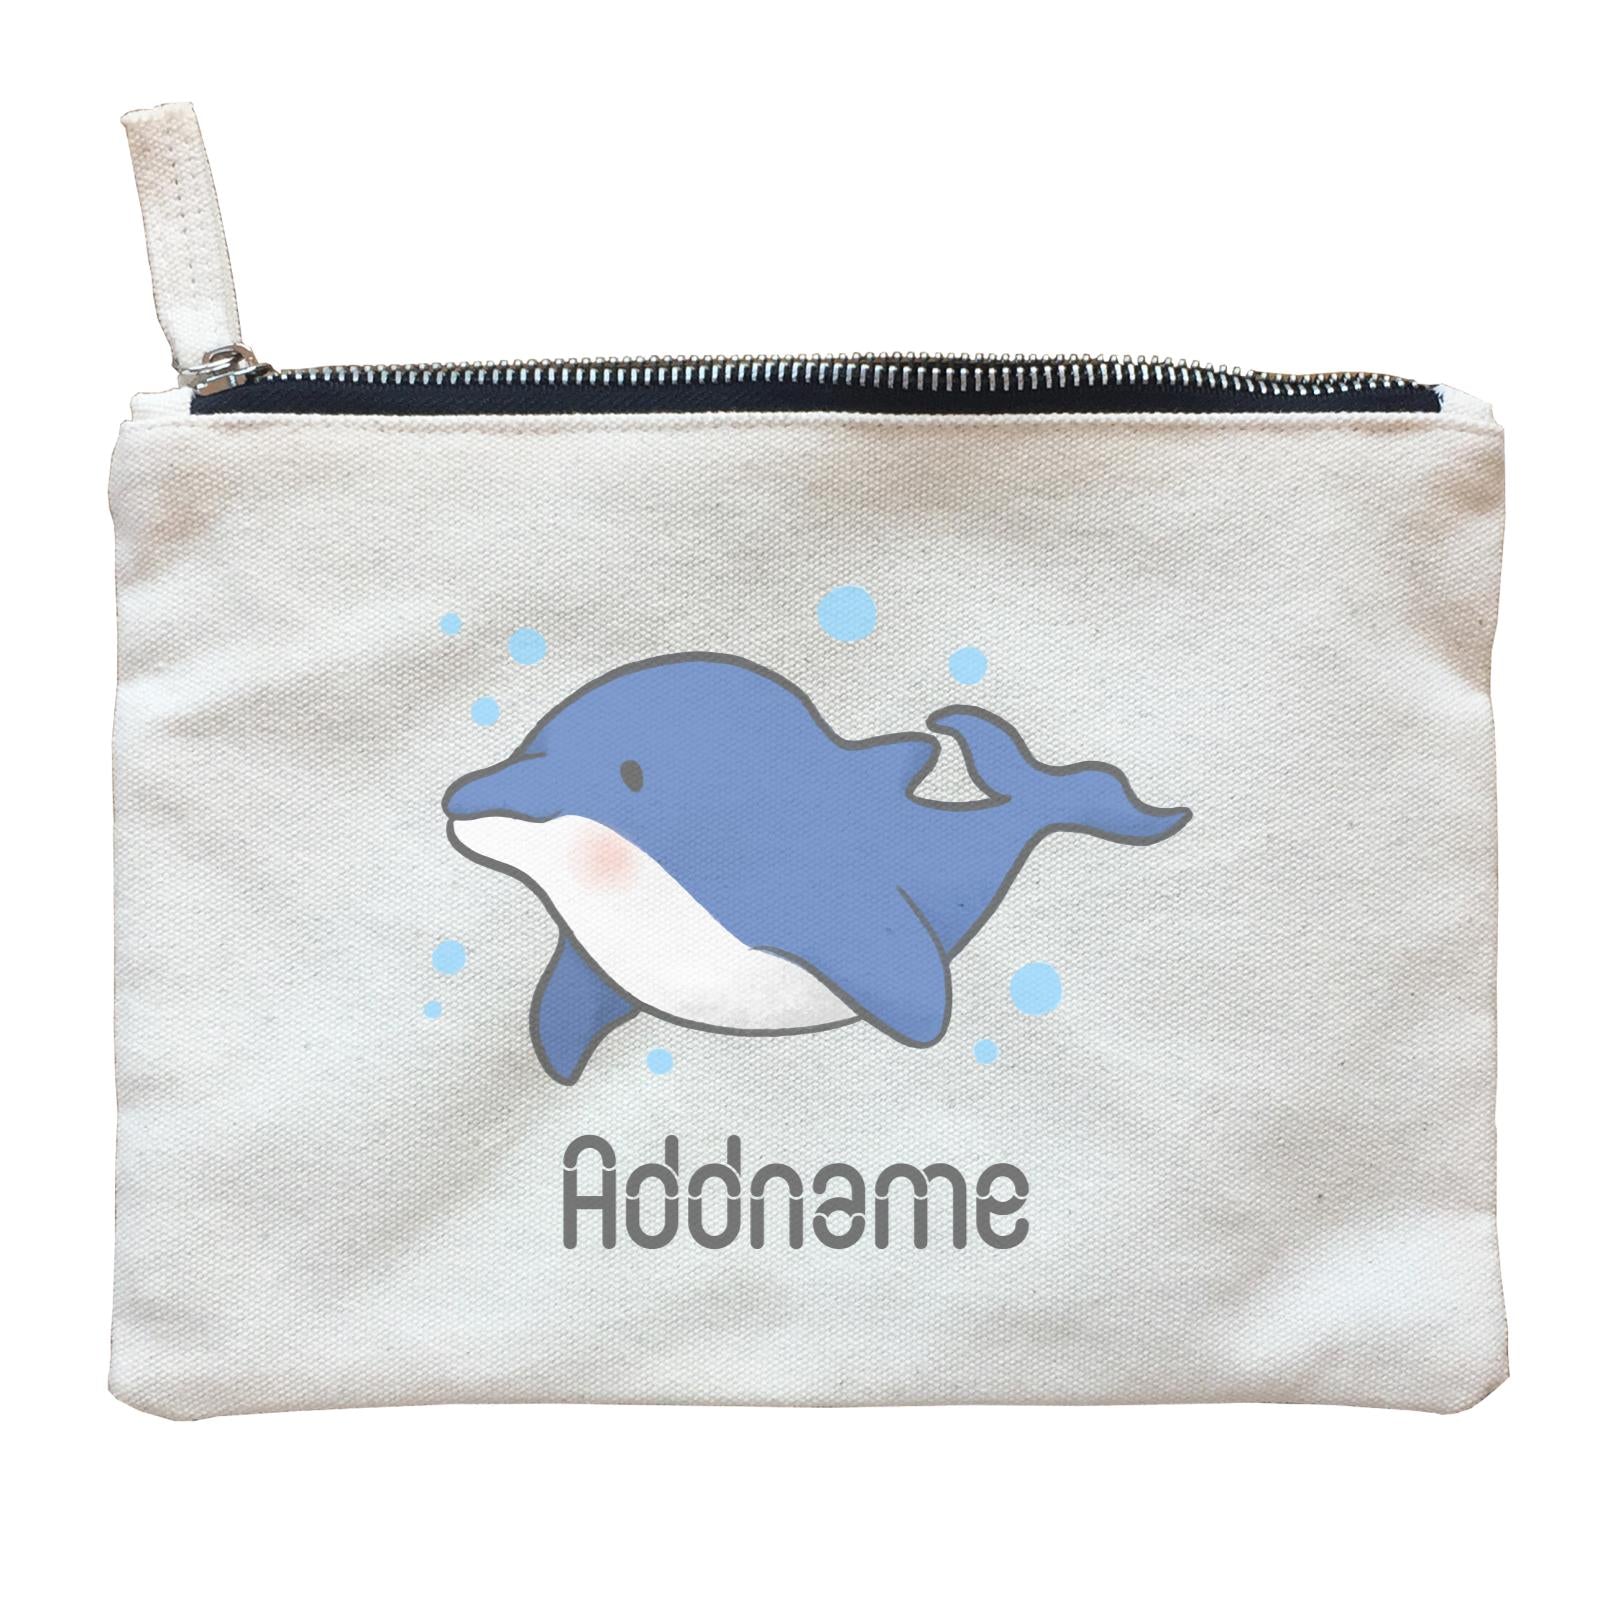 Cute Hand Drawn Style Dolphin Addname Zipper Pouch